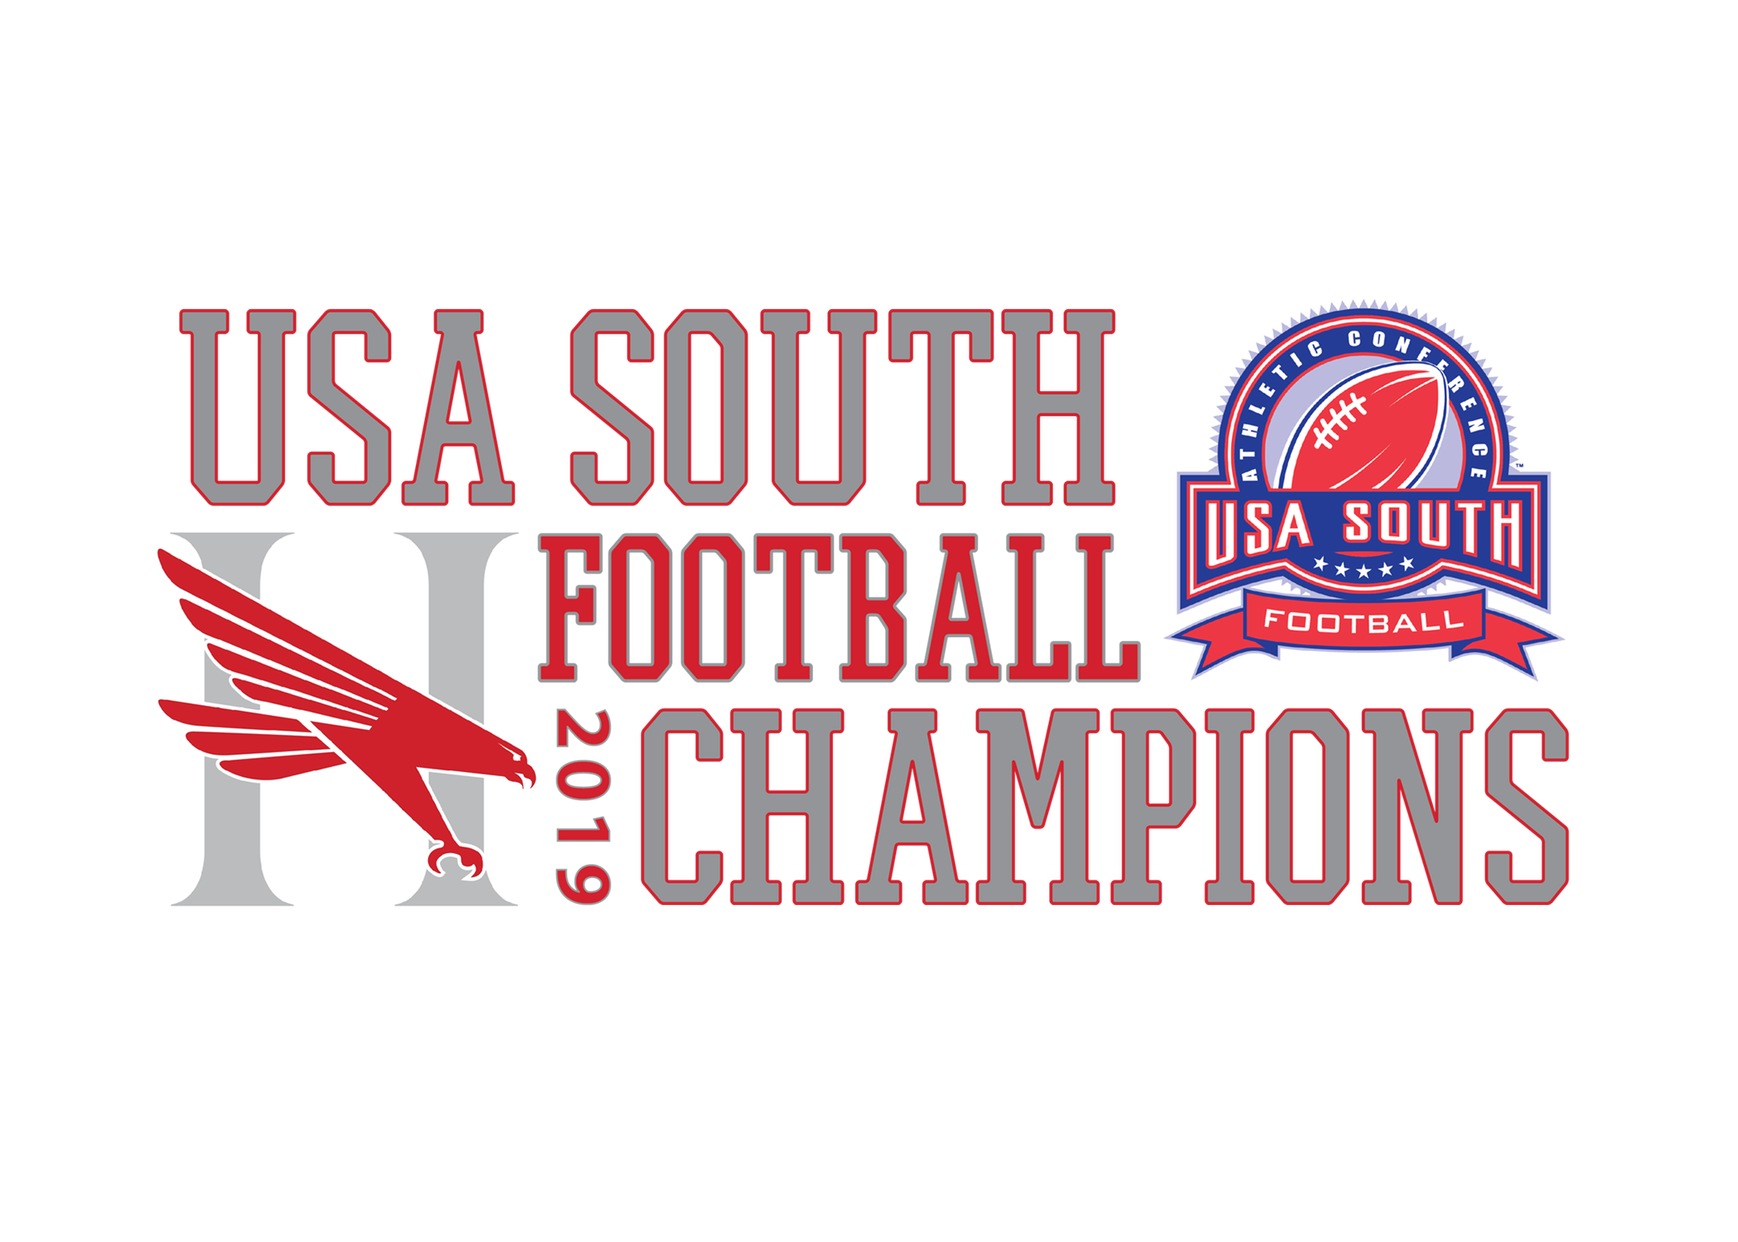 USA South championship gear available to Hawks’ fans